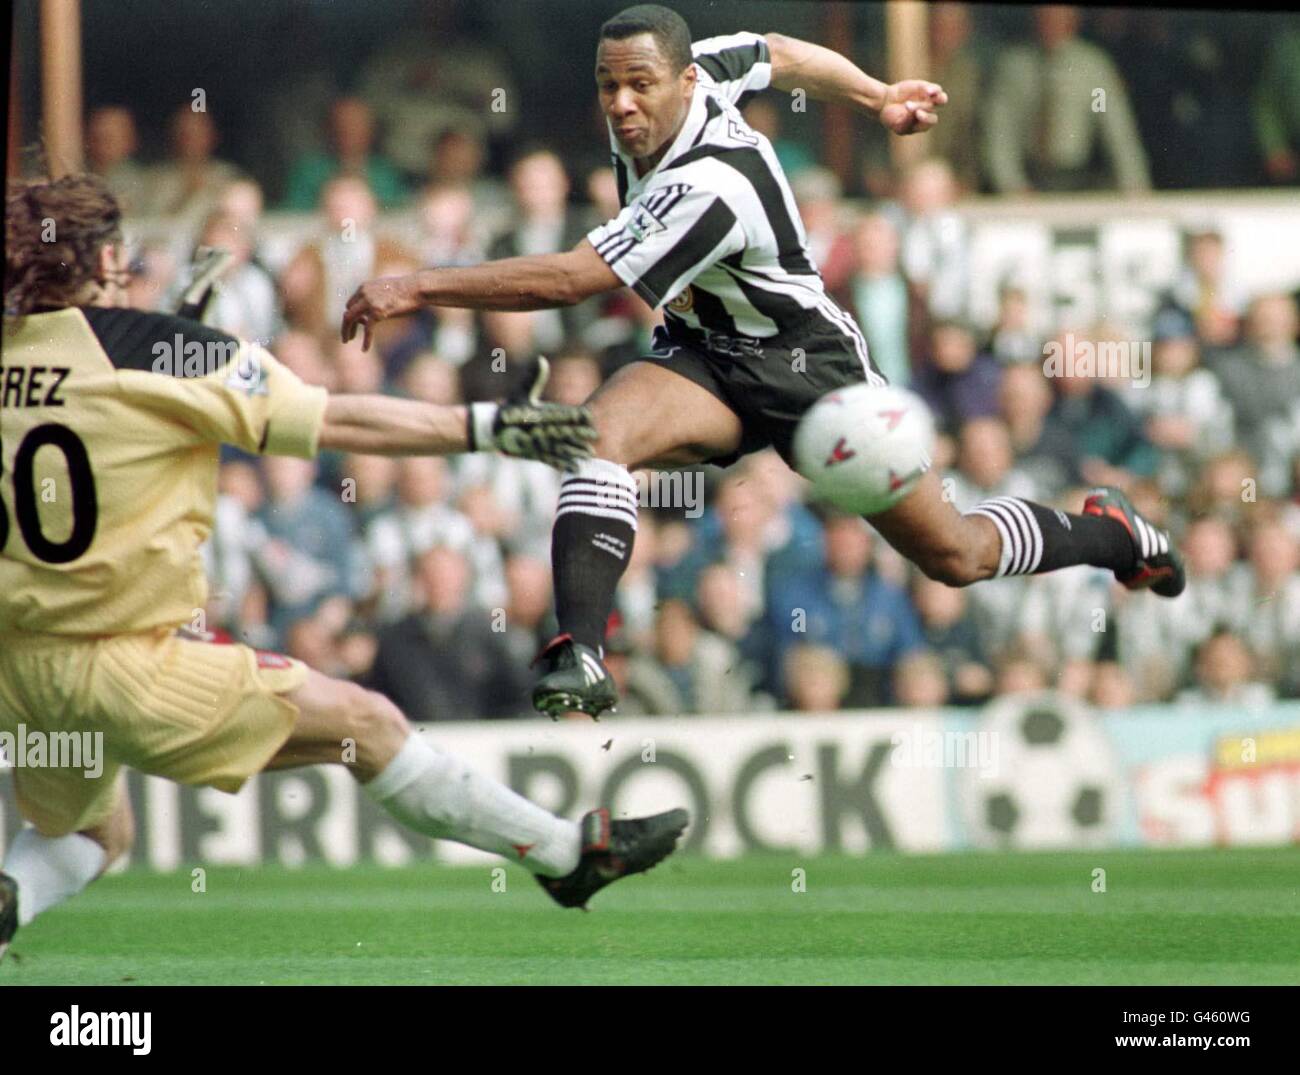 Newcastle's Les Ferdinand just shoots wide of Sunderland's Lionel Perez in the local Derby at St James' Park today (Sat). Photo by Owen Humphreys/PA Stock Photo